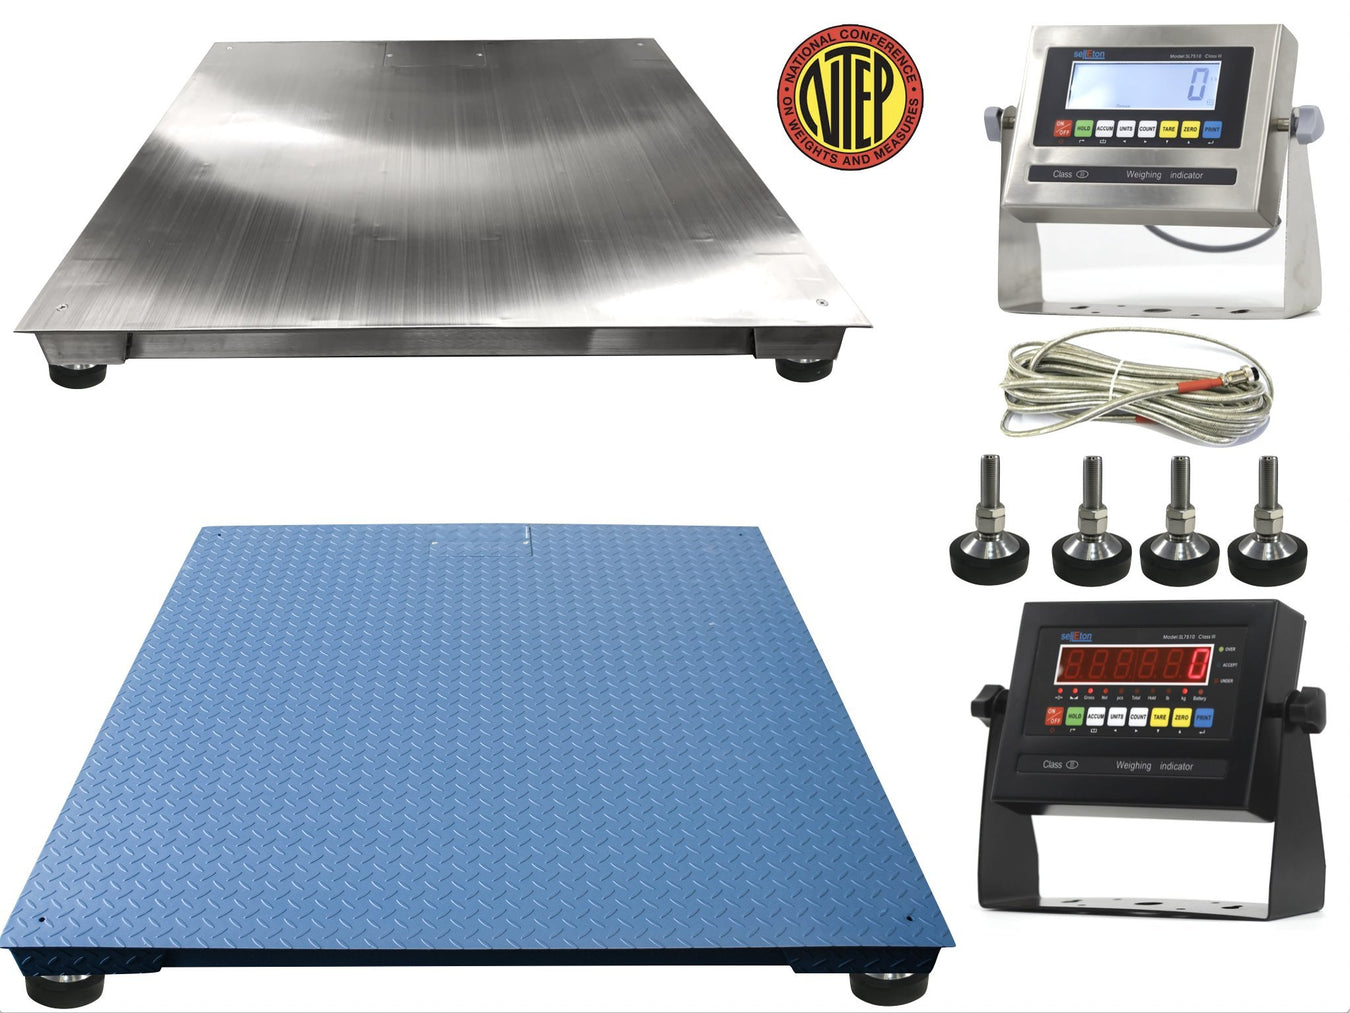 SL-800 & SL-900 NTEP Certified (Legal for trade) Floor Scales